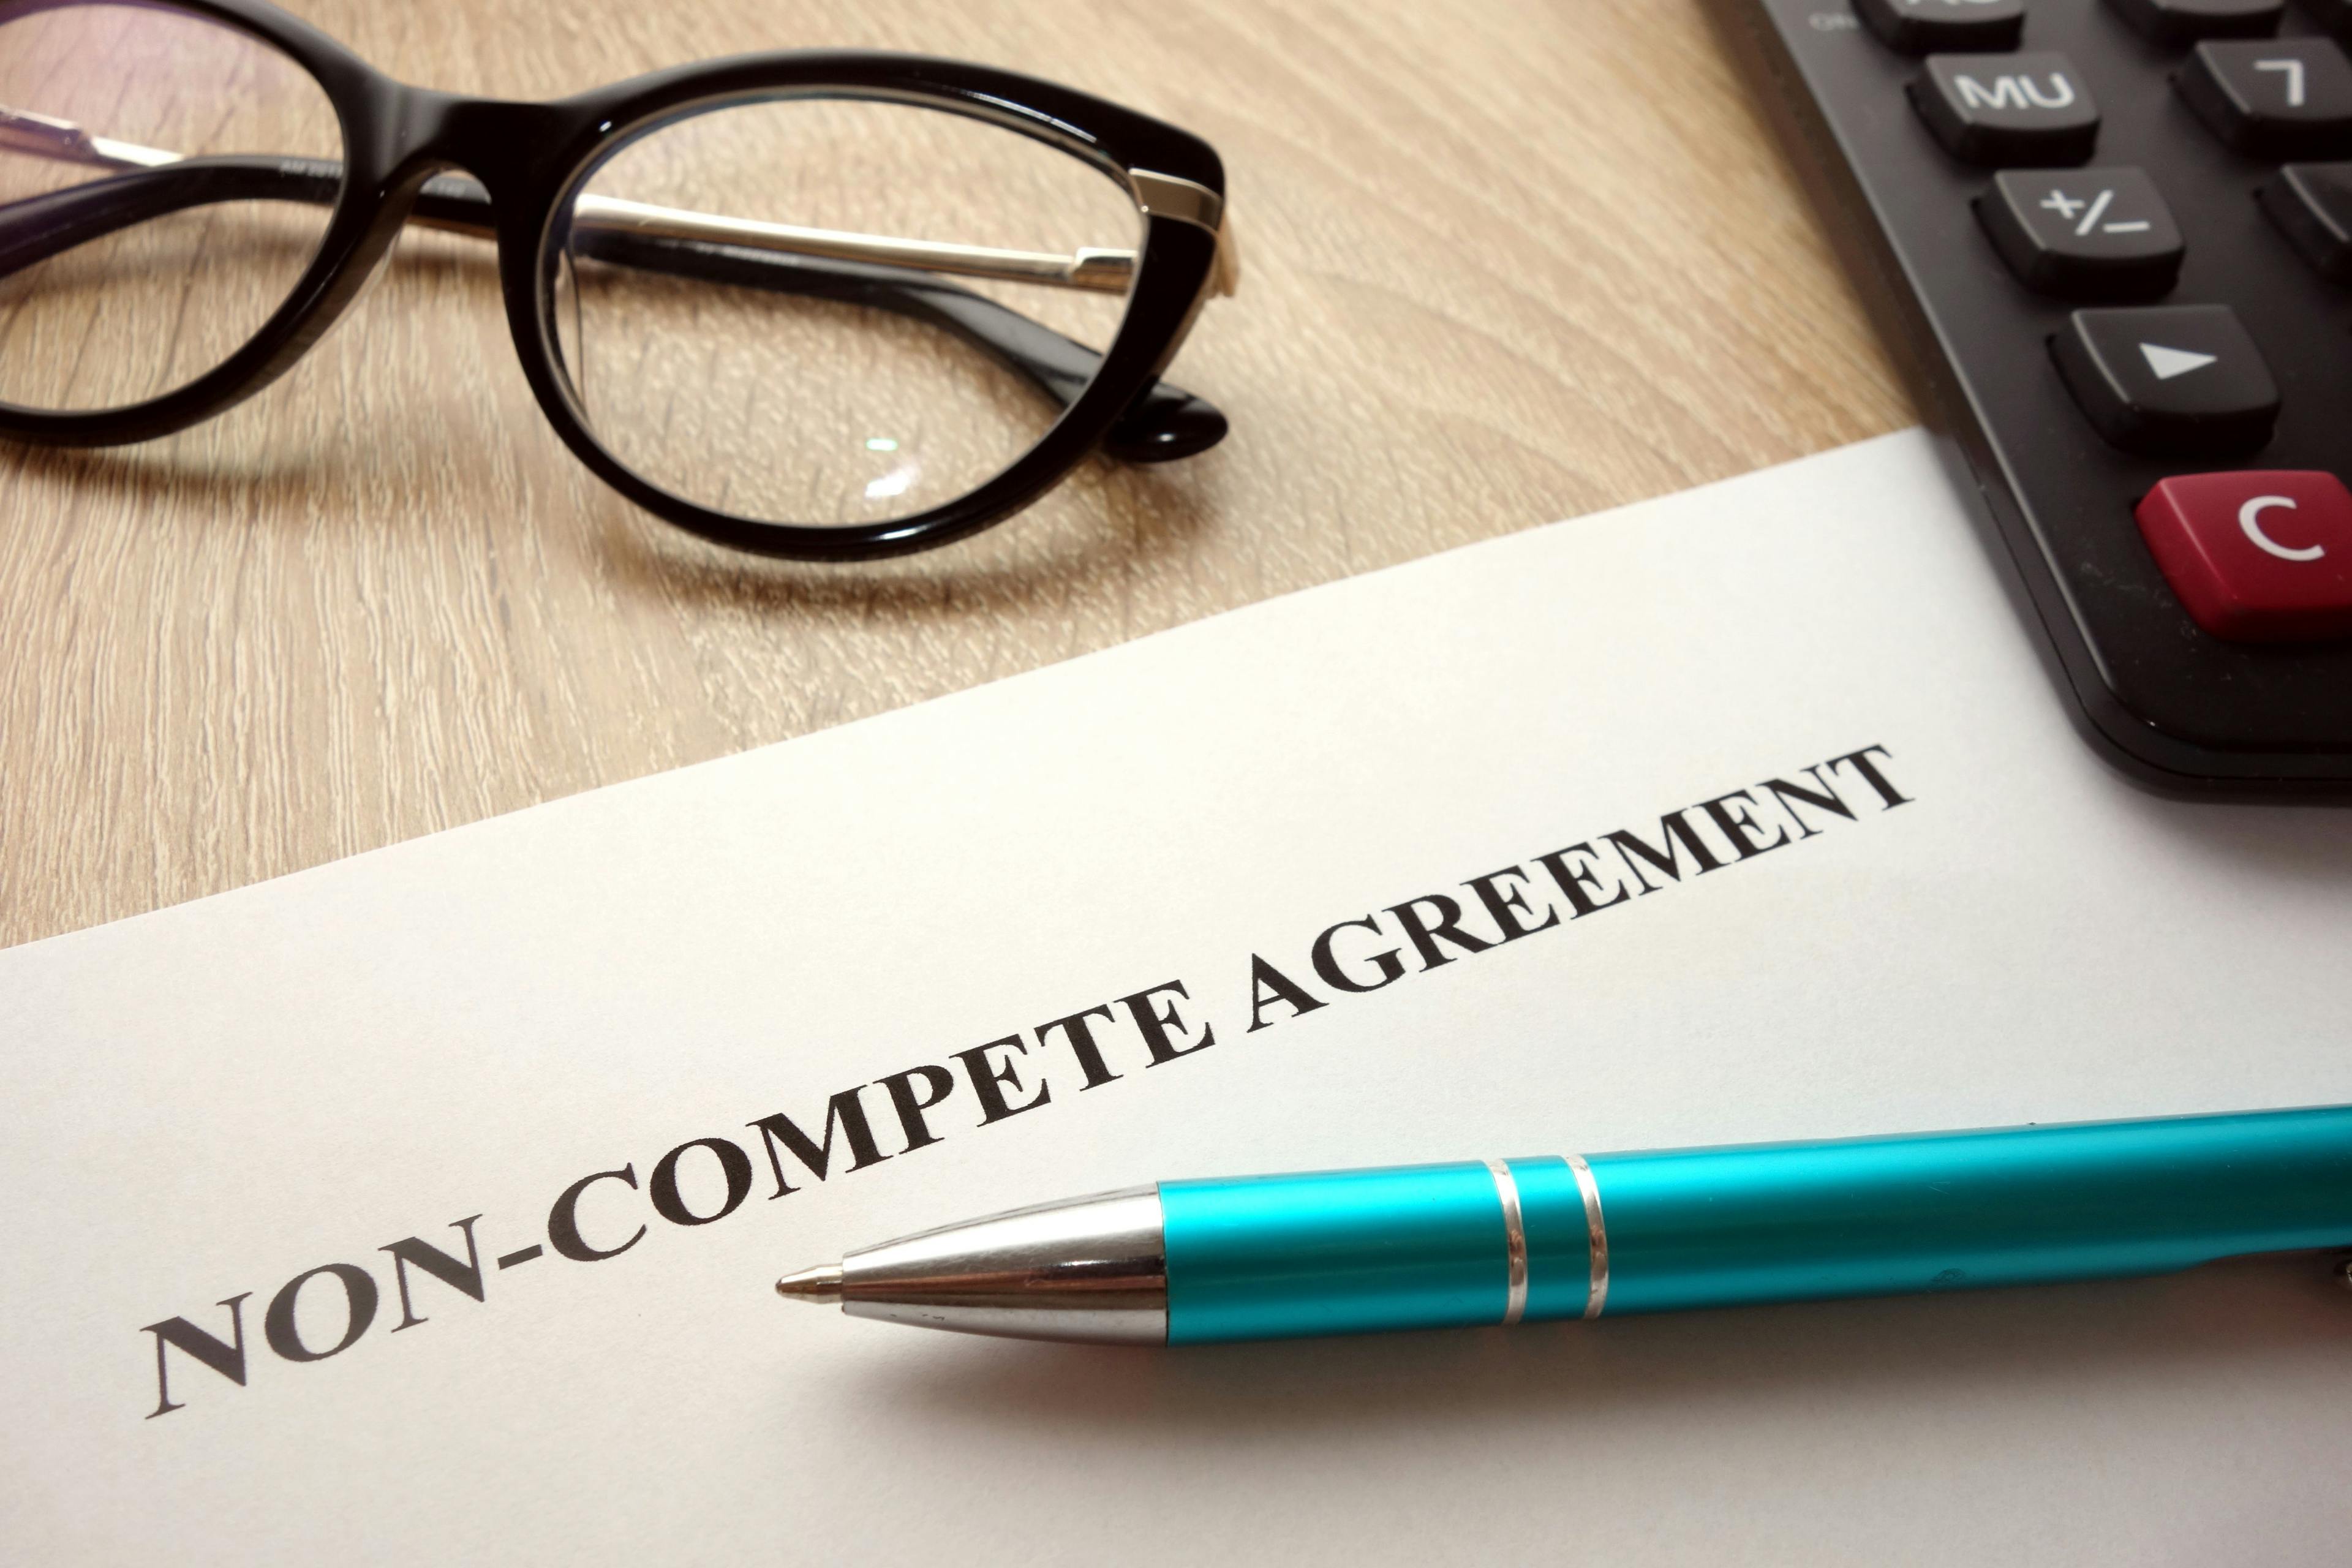 Noncompete agreements questioned: ©Pitir2121 - stock.adobe.com